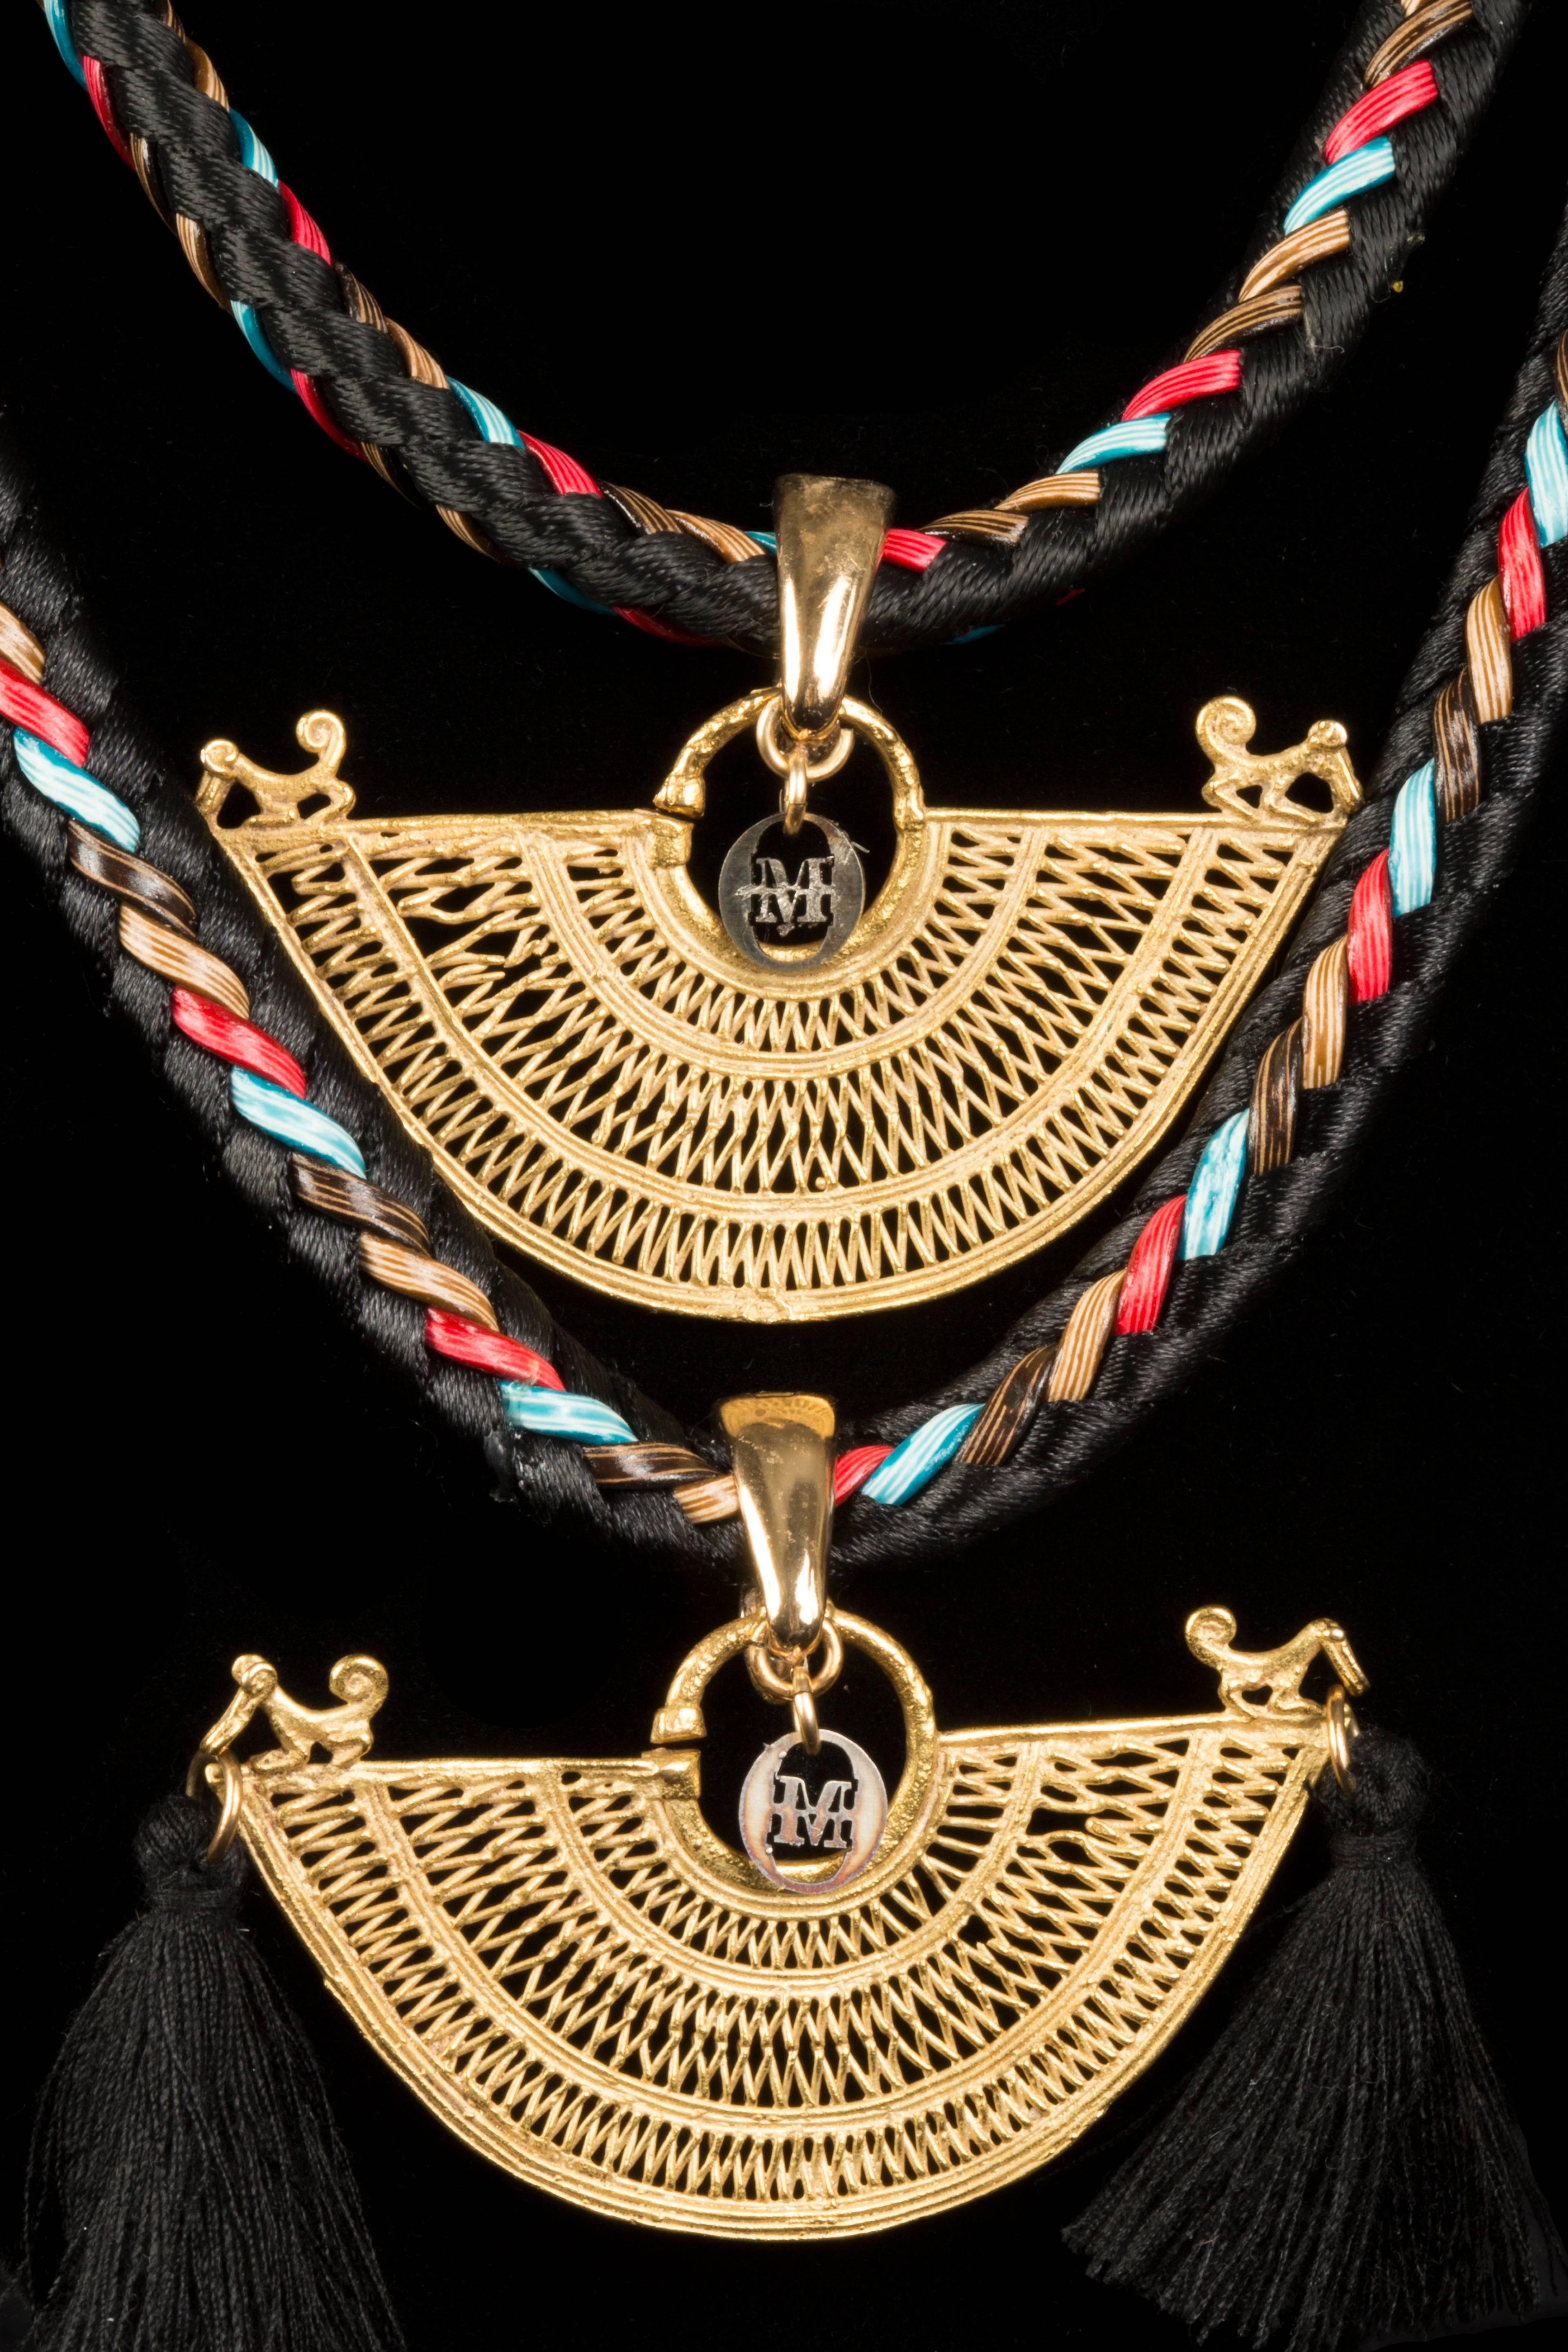 This double stranded necklace creates a cascade of pre-columbian gold from the Sinu Culture in Colombia. These intricate works were worn as earrings by the natives nearly 1,000 years ago.  They have been reworked with a modern design. Modern new